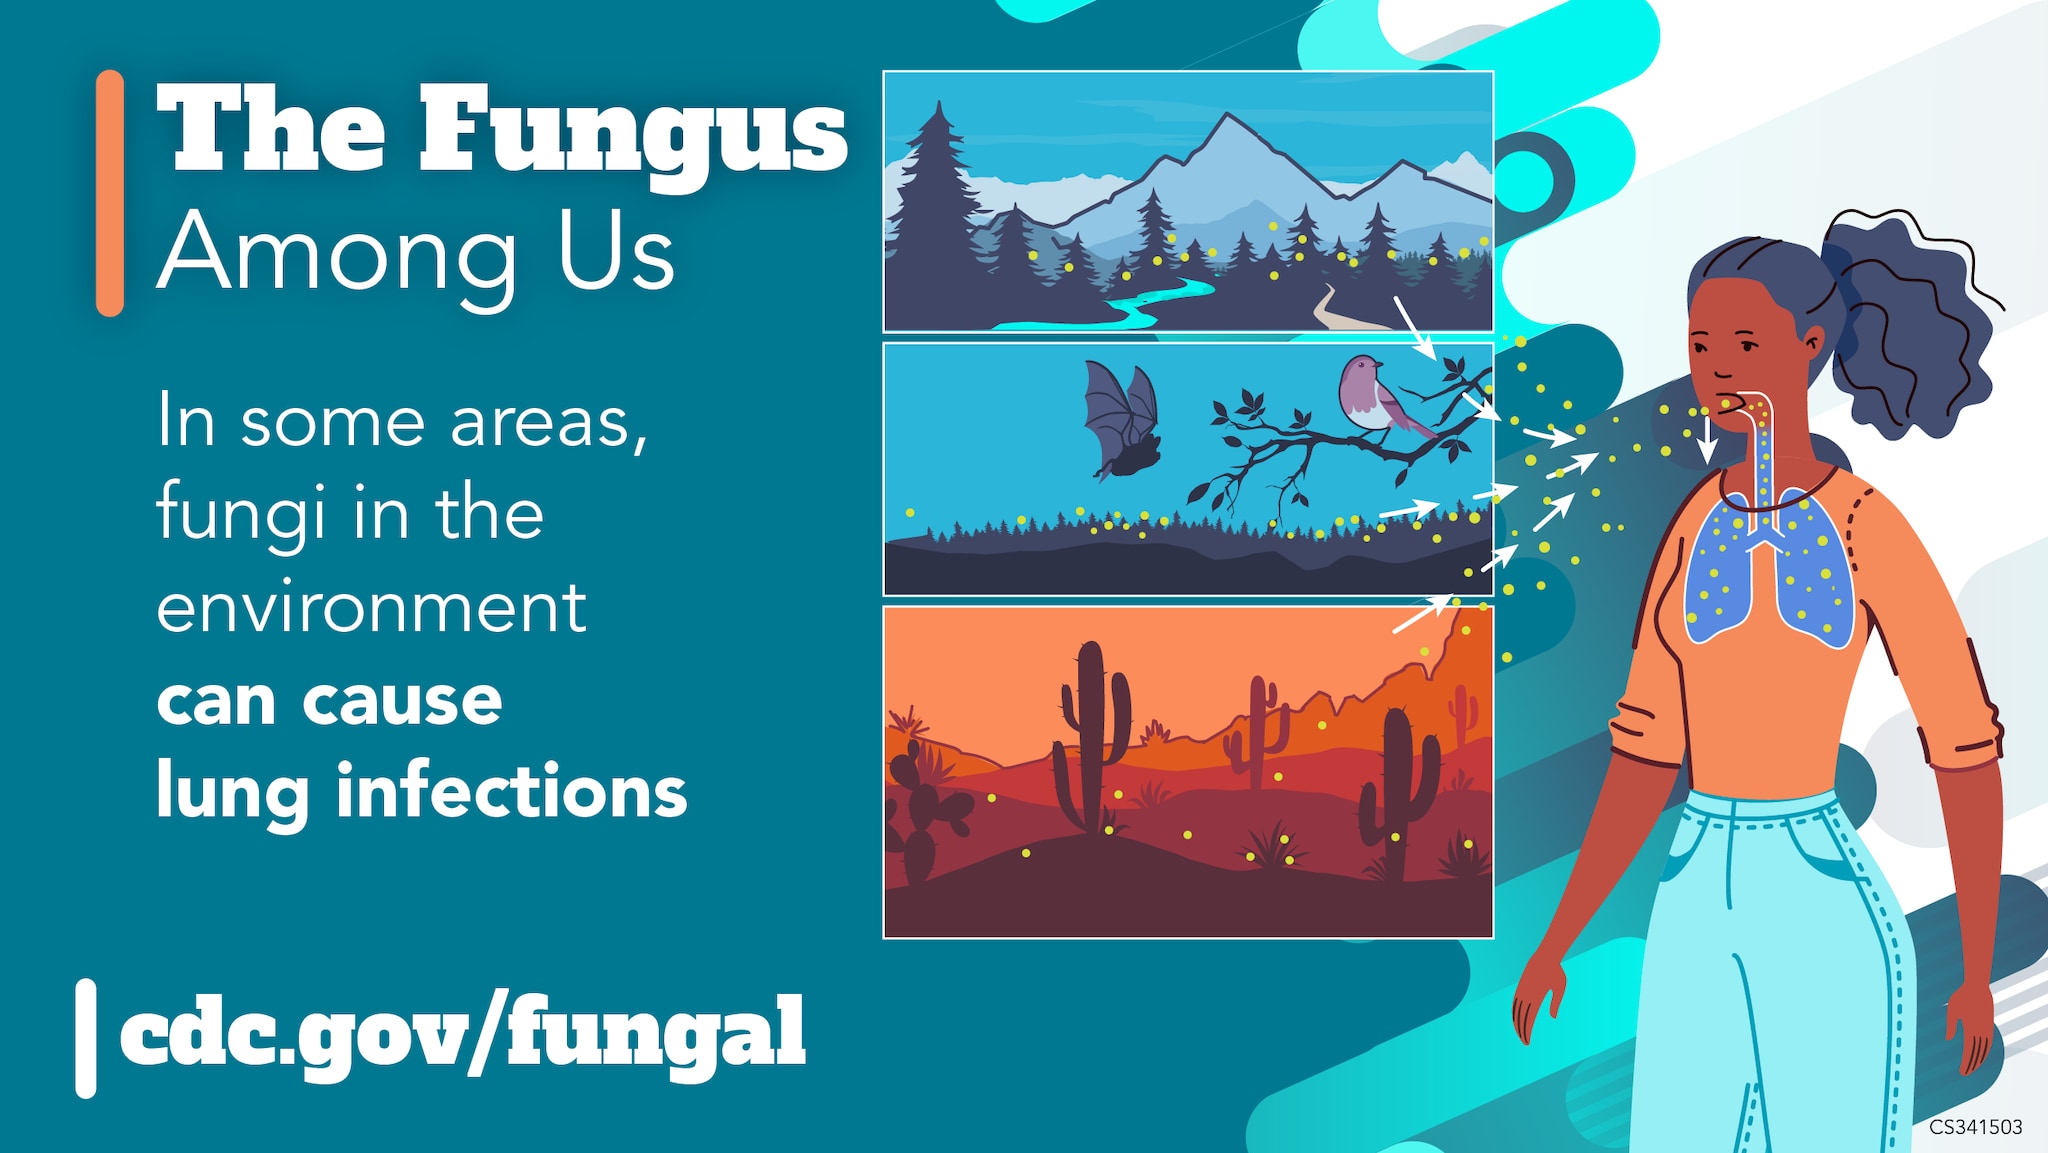 The Fungus Amoung Us: In some areas, fungi in the environment can cause lung infections. cdc.gov/fungal